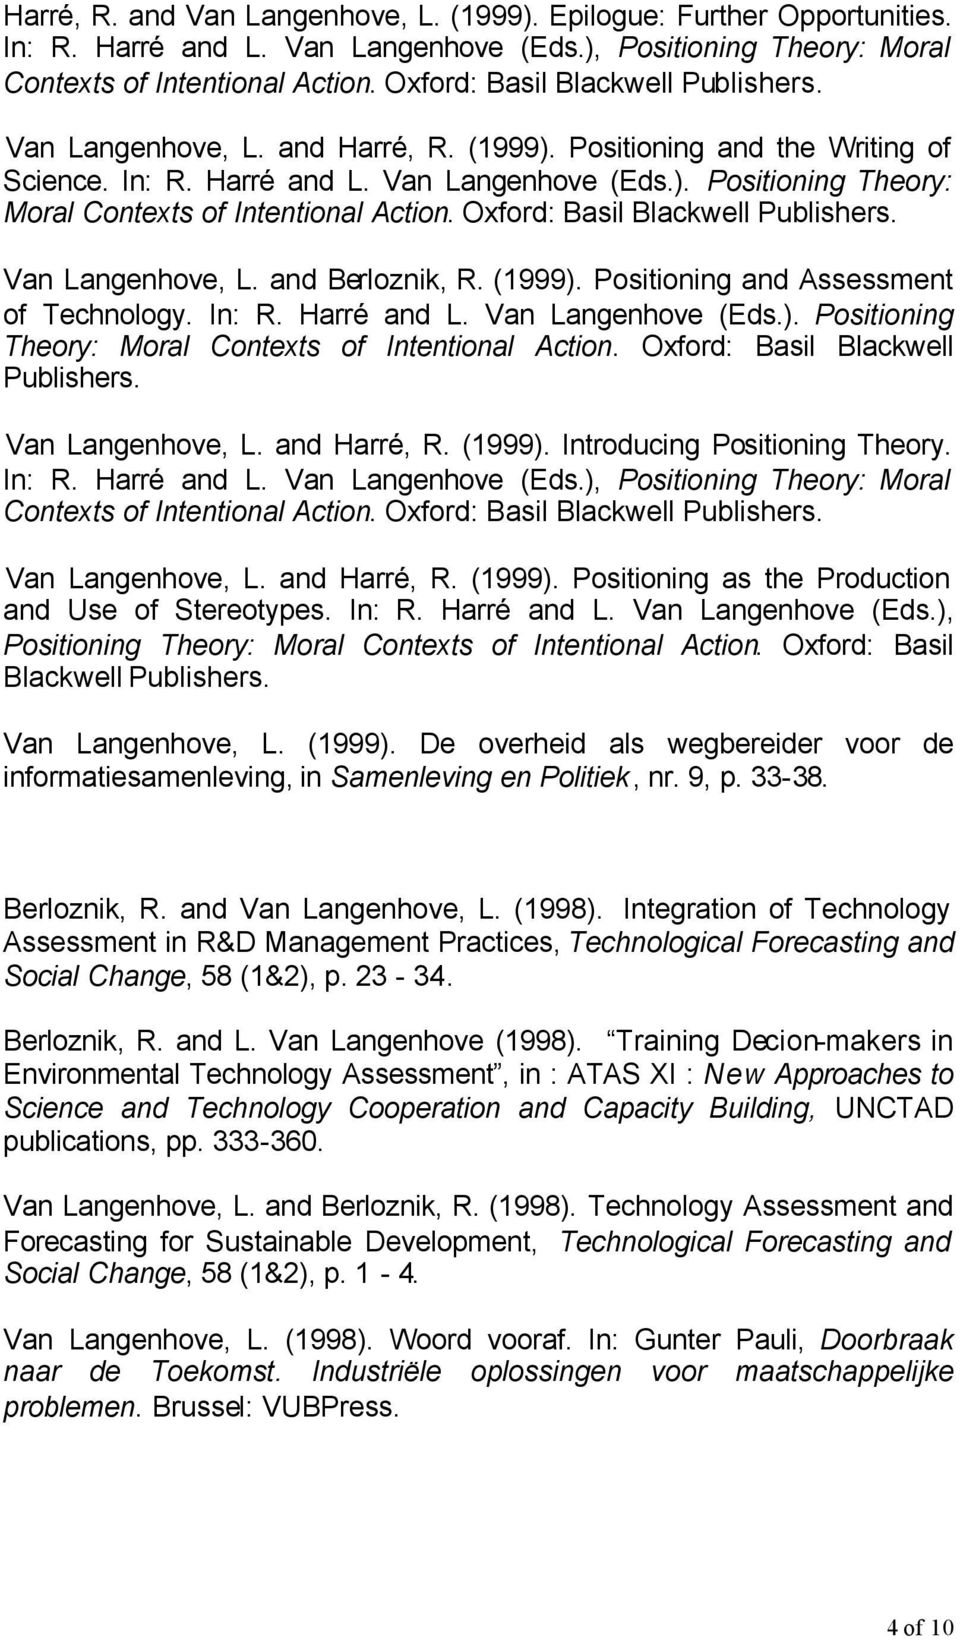 Oxford: Basil Blackwell Publishers. Van Langenhove, L. and Berloznik, R. (1999). Positioning and Assessment of Technology. In: R. Harré and L. Van Langenhove (Eds.). Positioning Theory: Moral Contexts of Intentional Action.